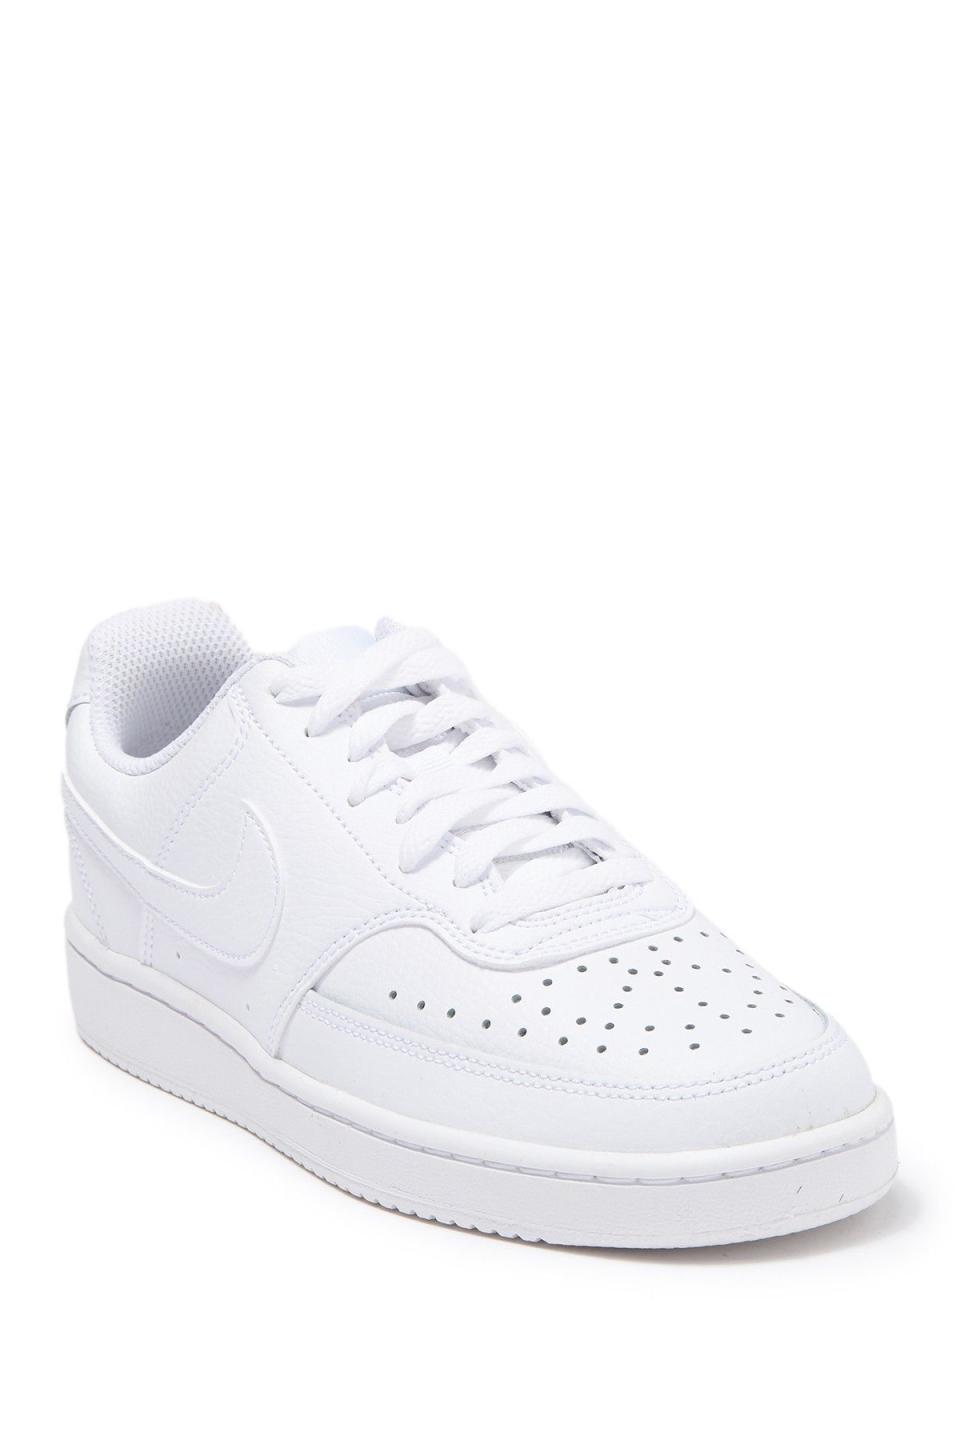 1) Court Vision Low Sneaker